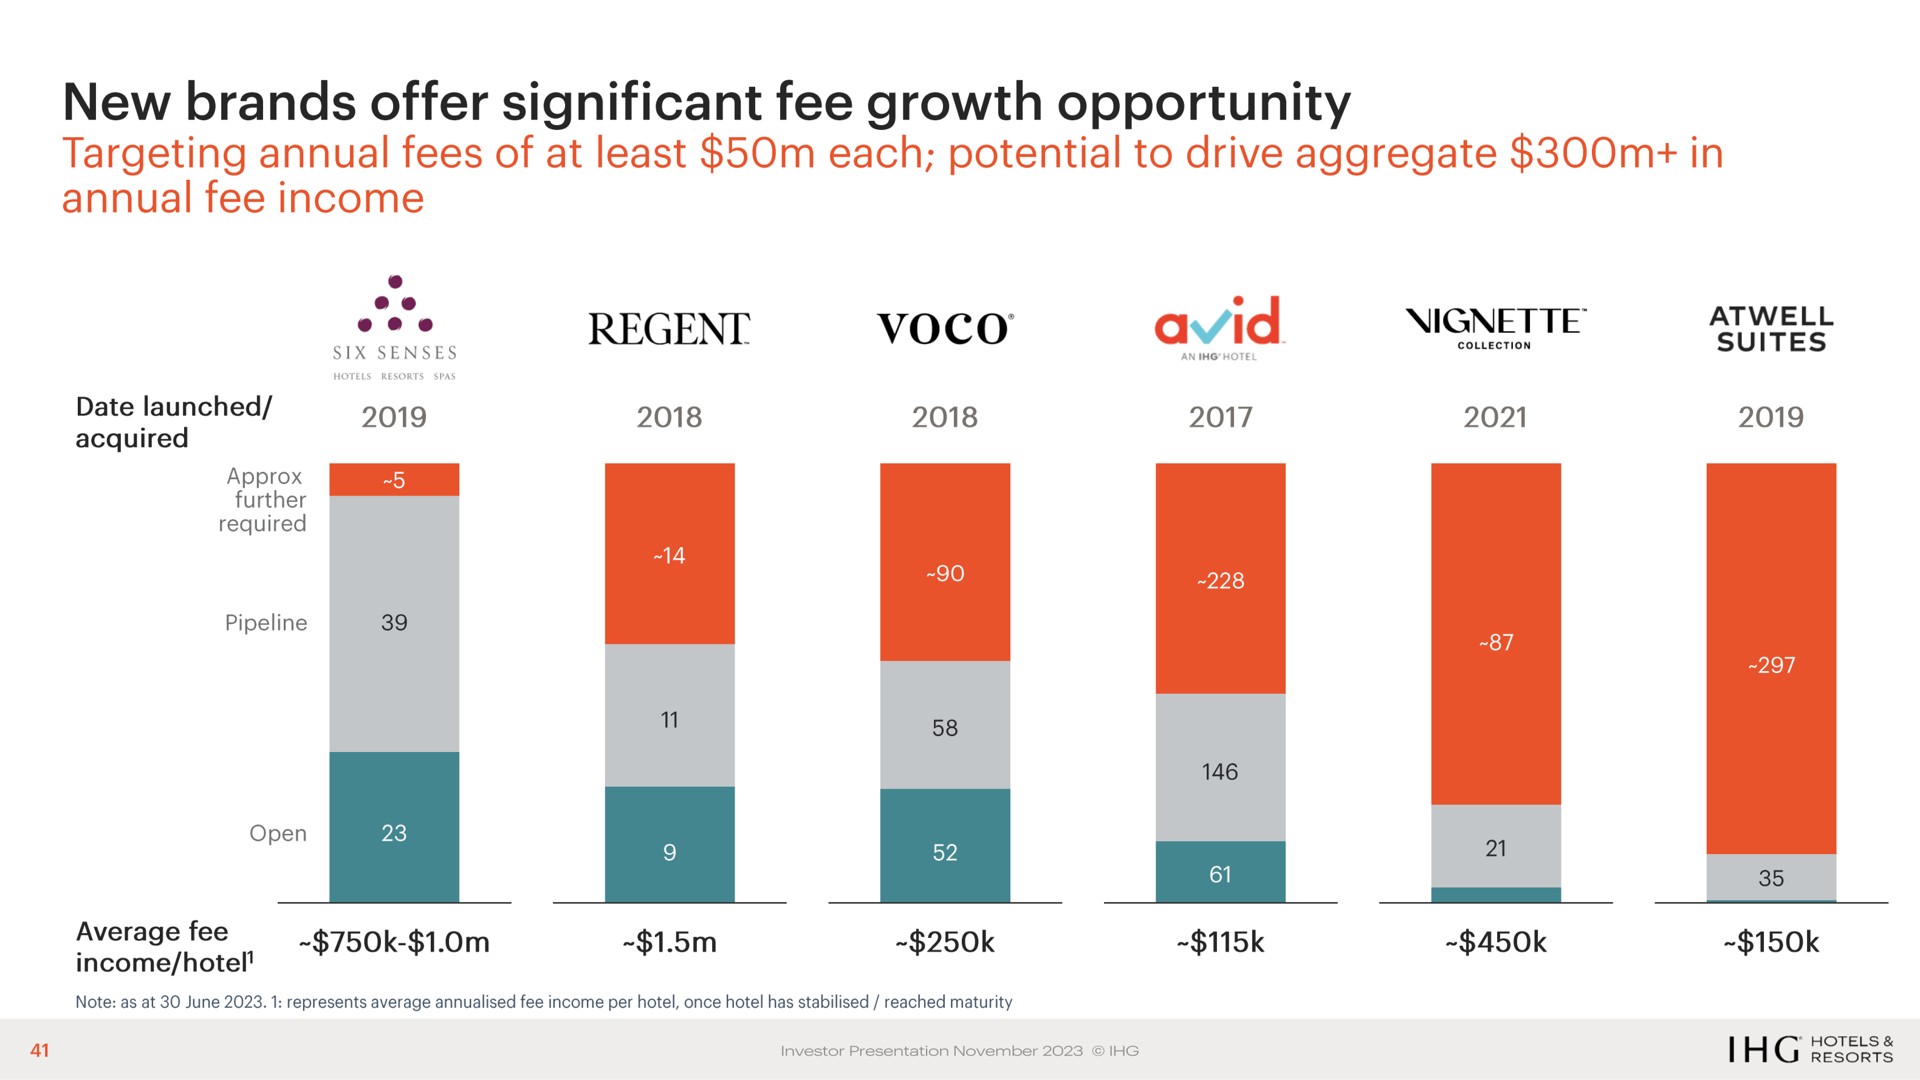 new brands offer significant fee growth opportunity senses avid open boa | IHG Hotels